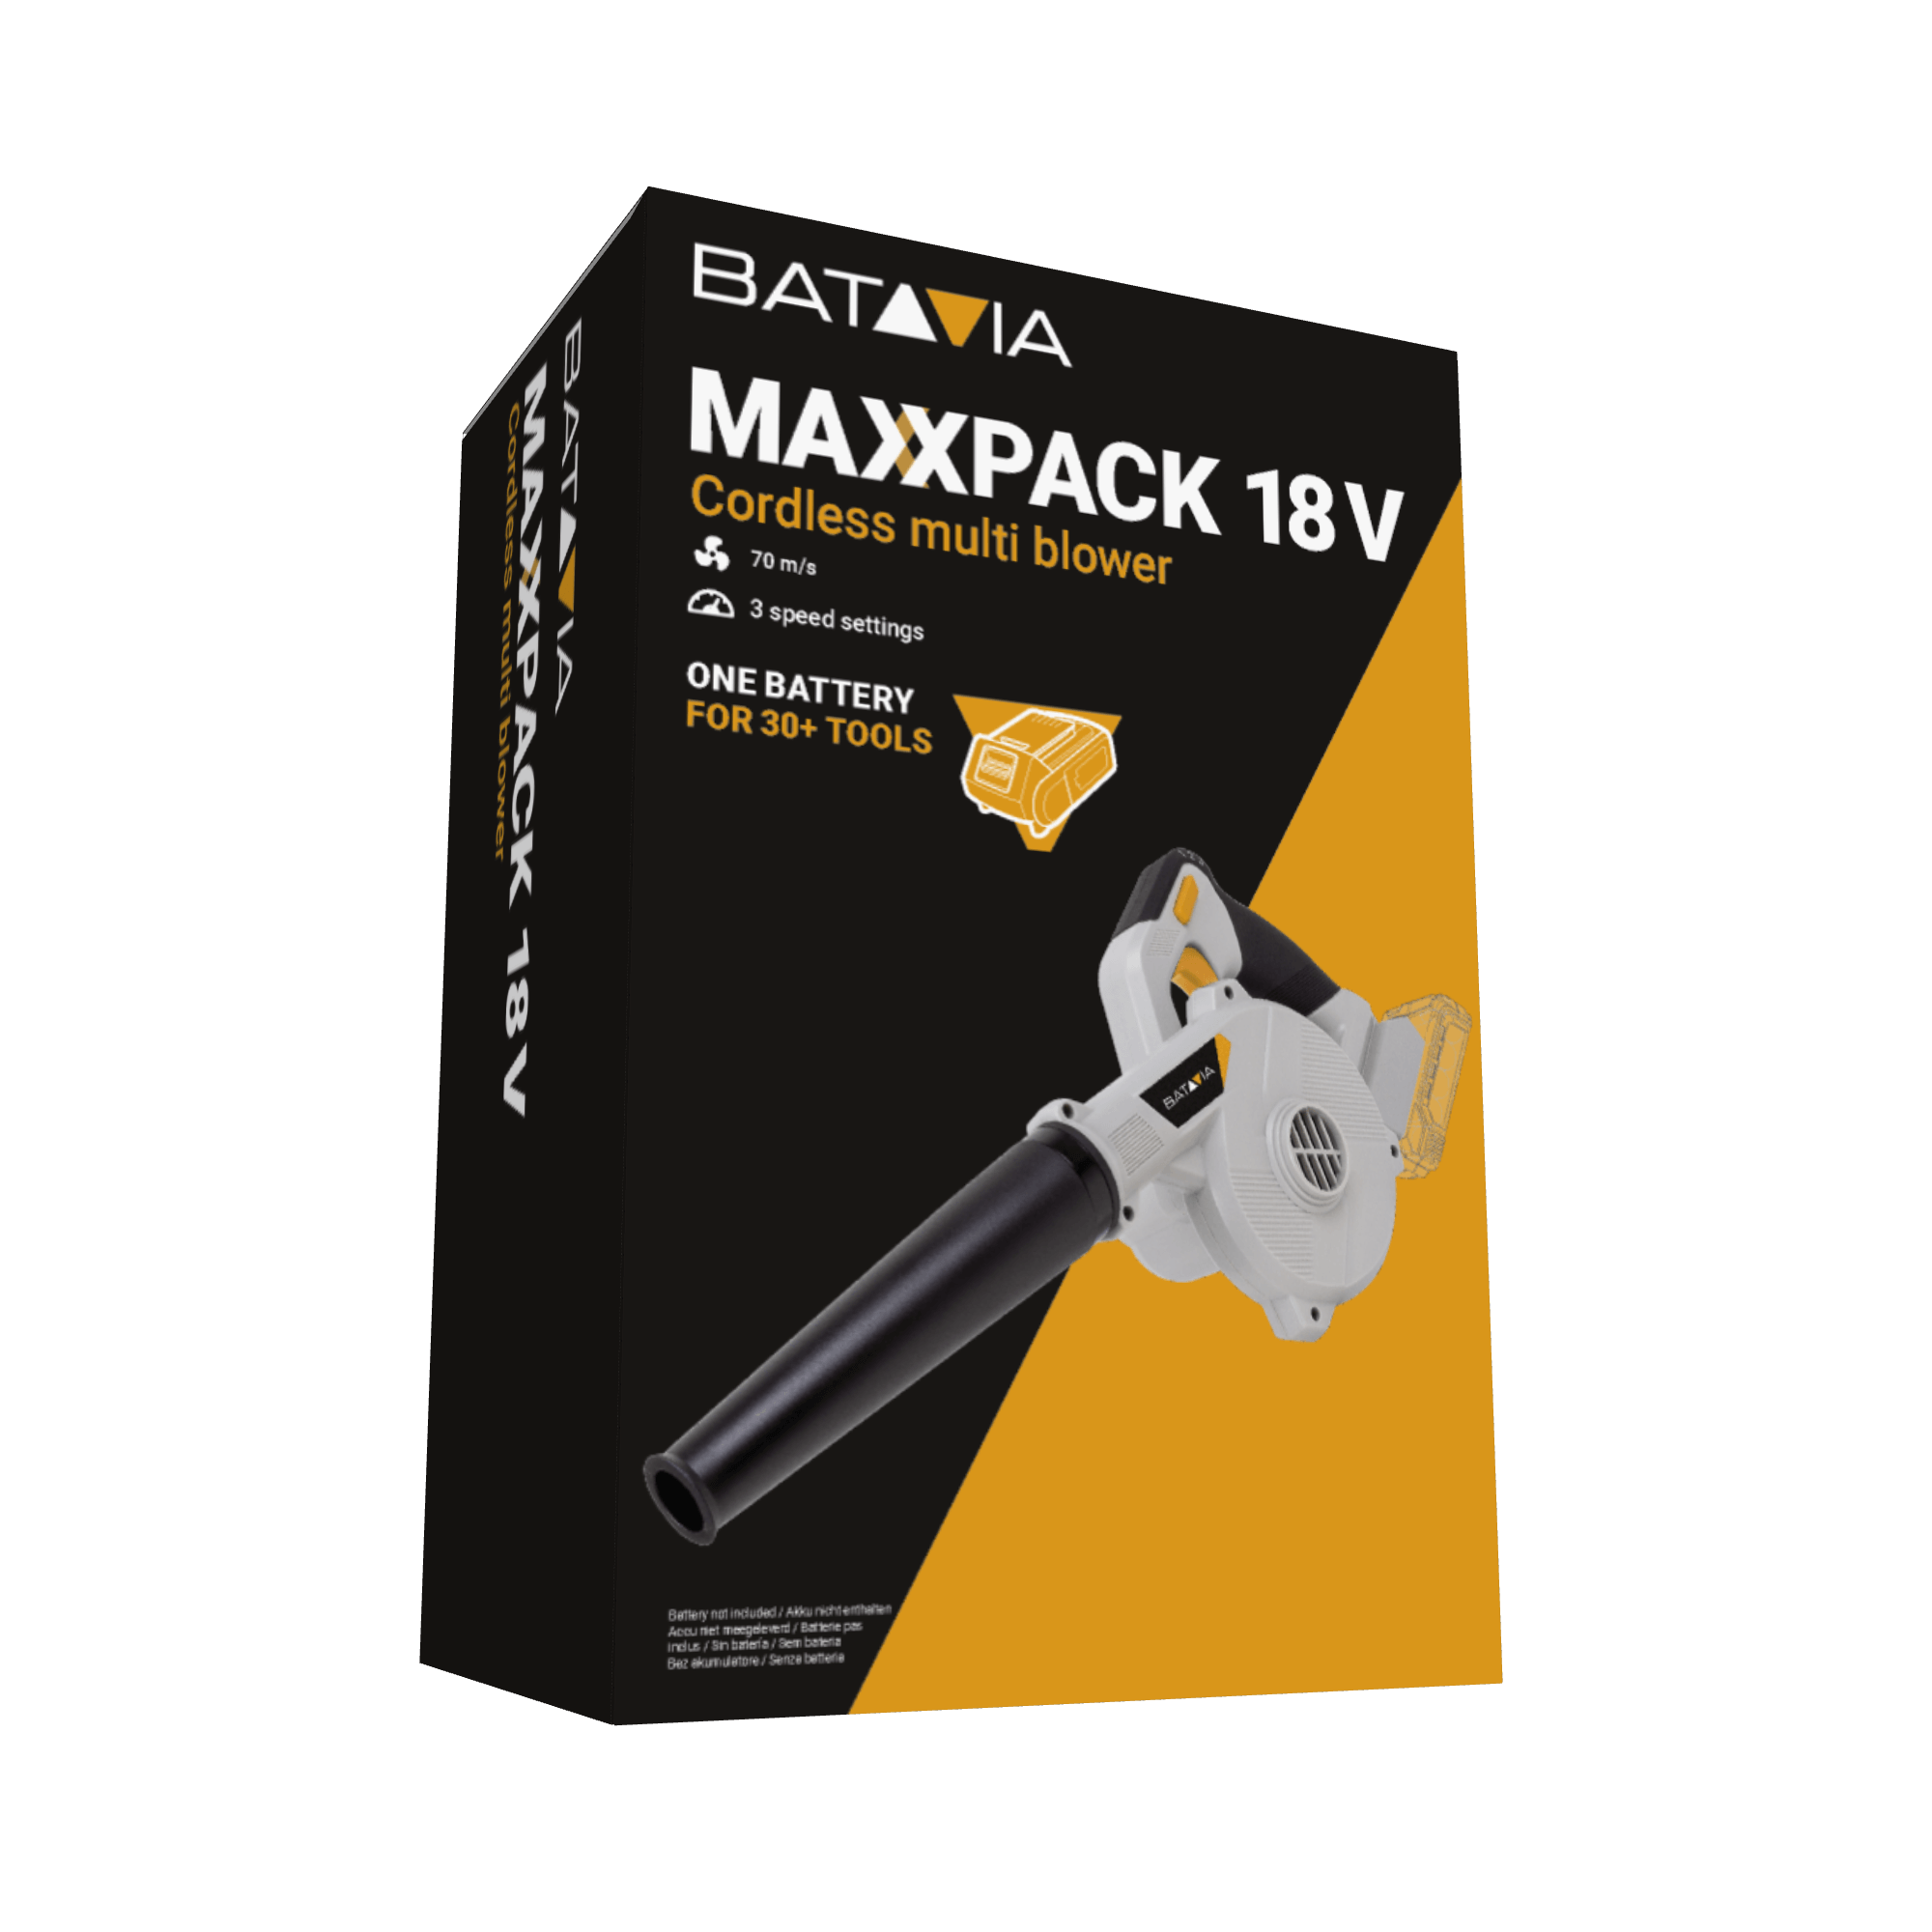 Packaging Multifunctional blower | Maxxpack collection | Batavia